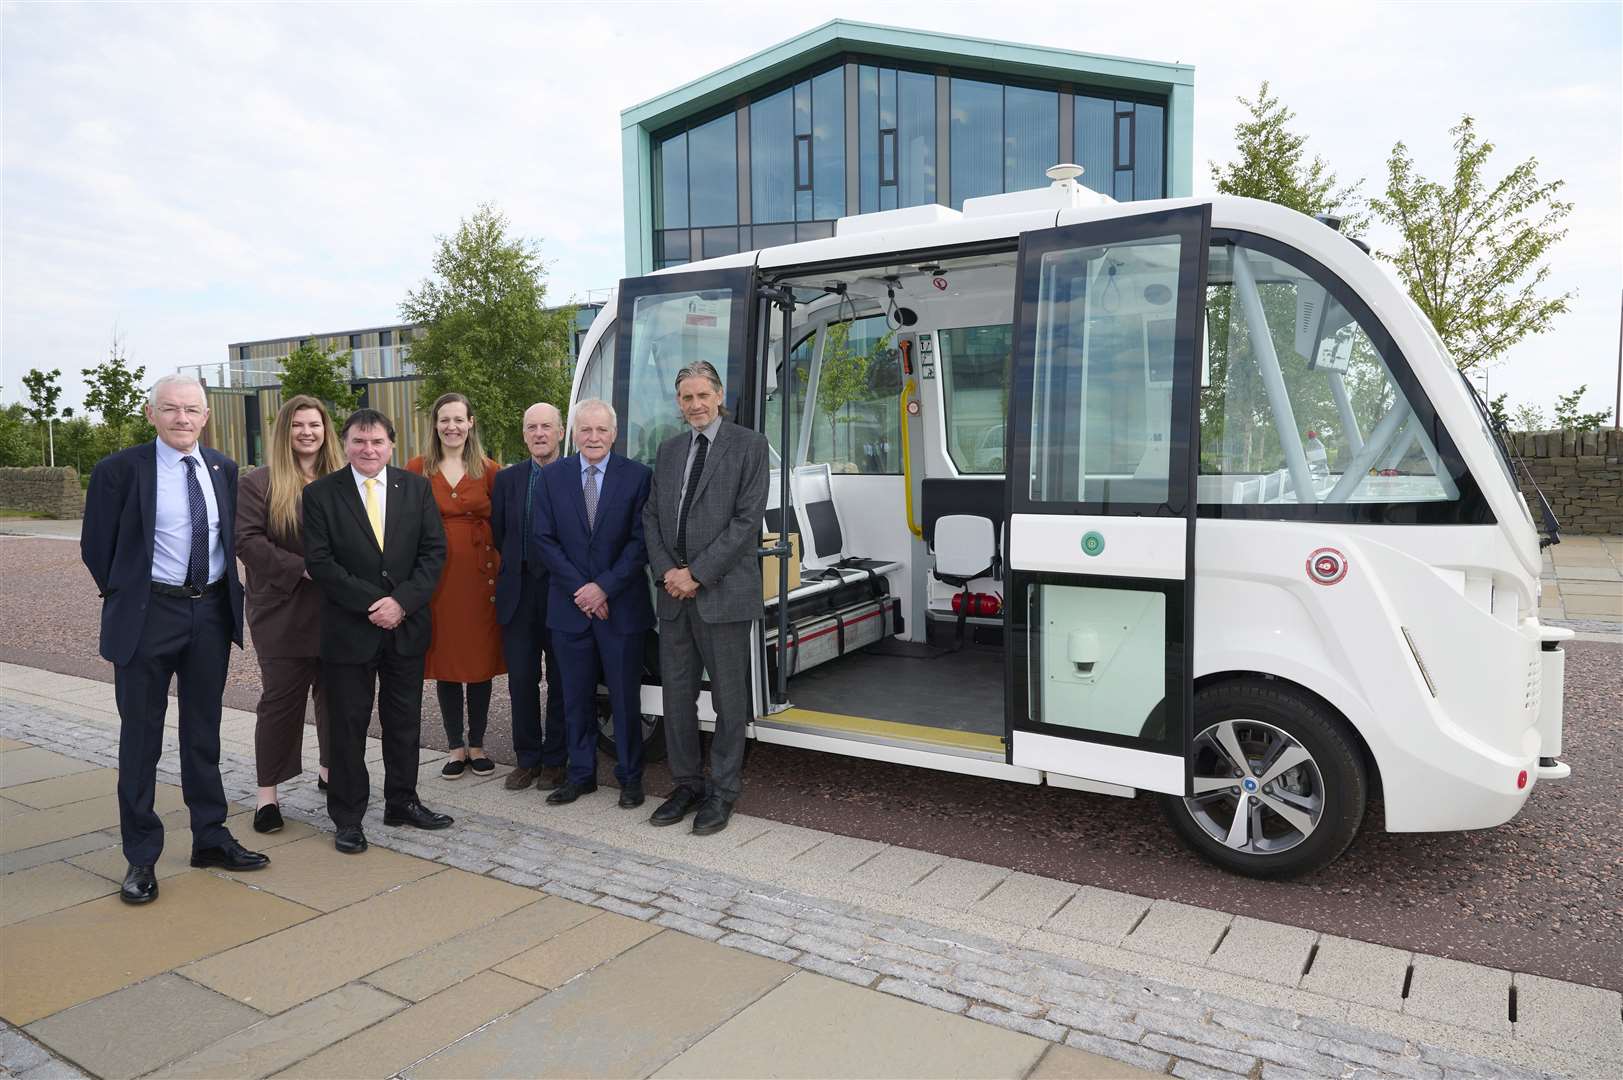 Taking a look at the first driverless bus in Inverness are Cllr David Dawson (Orkney), Cllr Amber Dunbar (Moray), Cllr Ken Gowans (Highland), Naomi Bremner, Cllr Uisdean Robertson (Comhairle nan Eilean Siar and chairman of Hitrans), Cllr Andrew Kain (Argyll & Bute) and Prof David Gray.